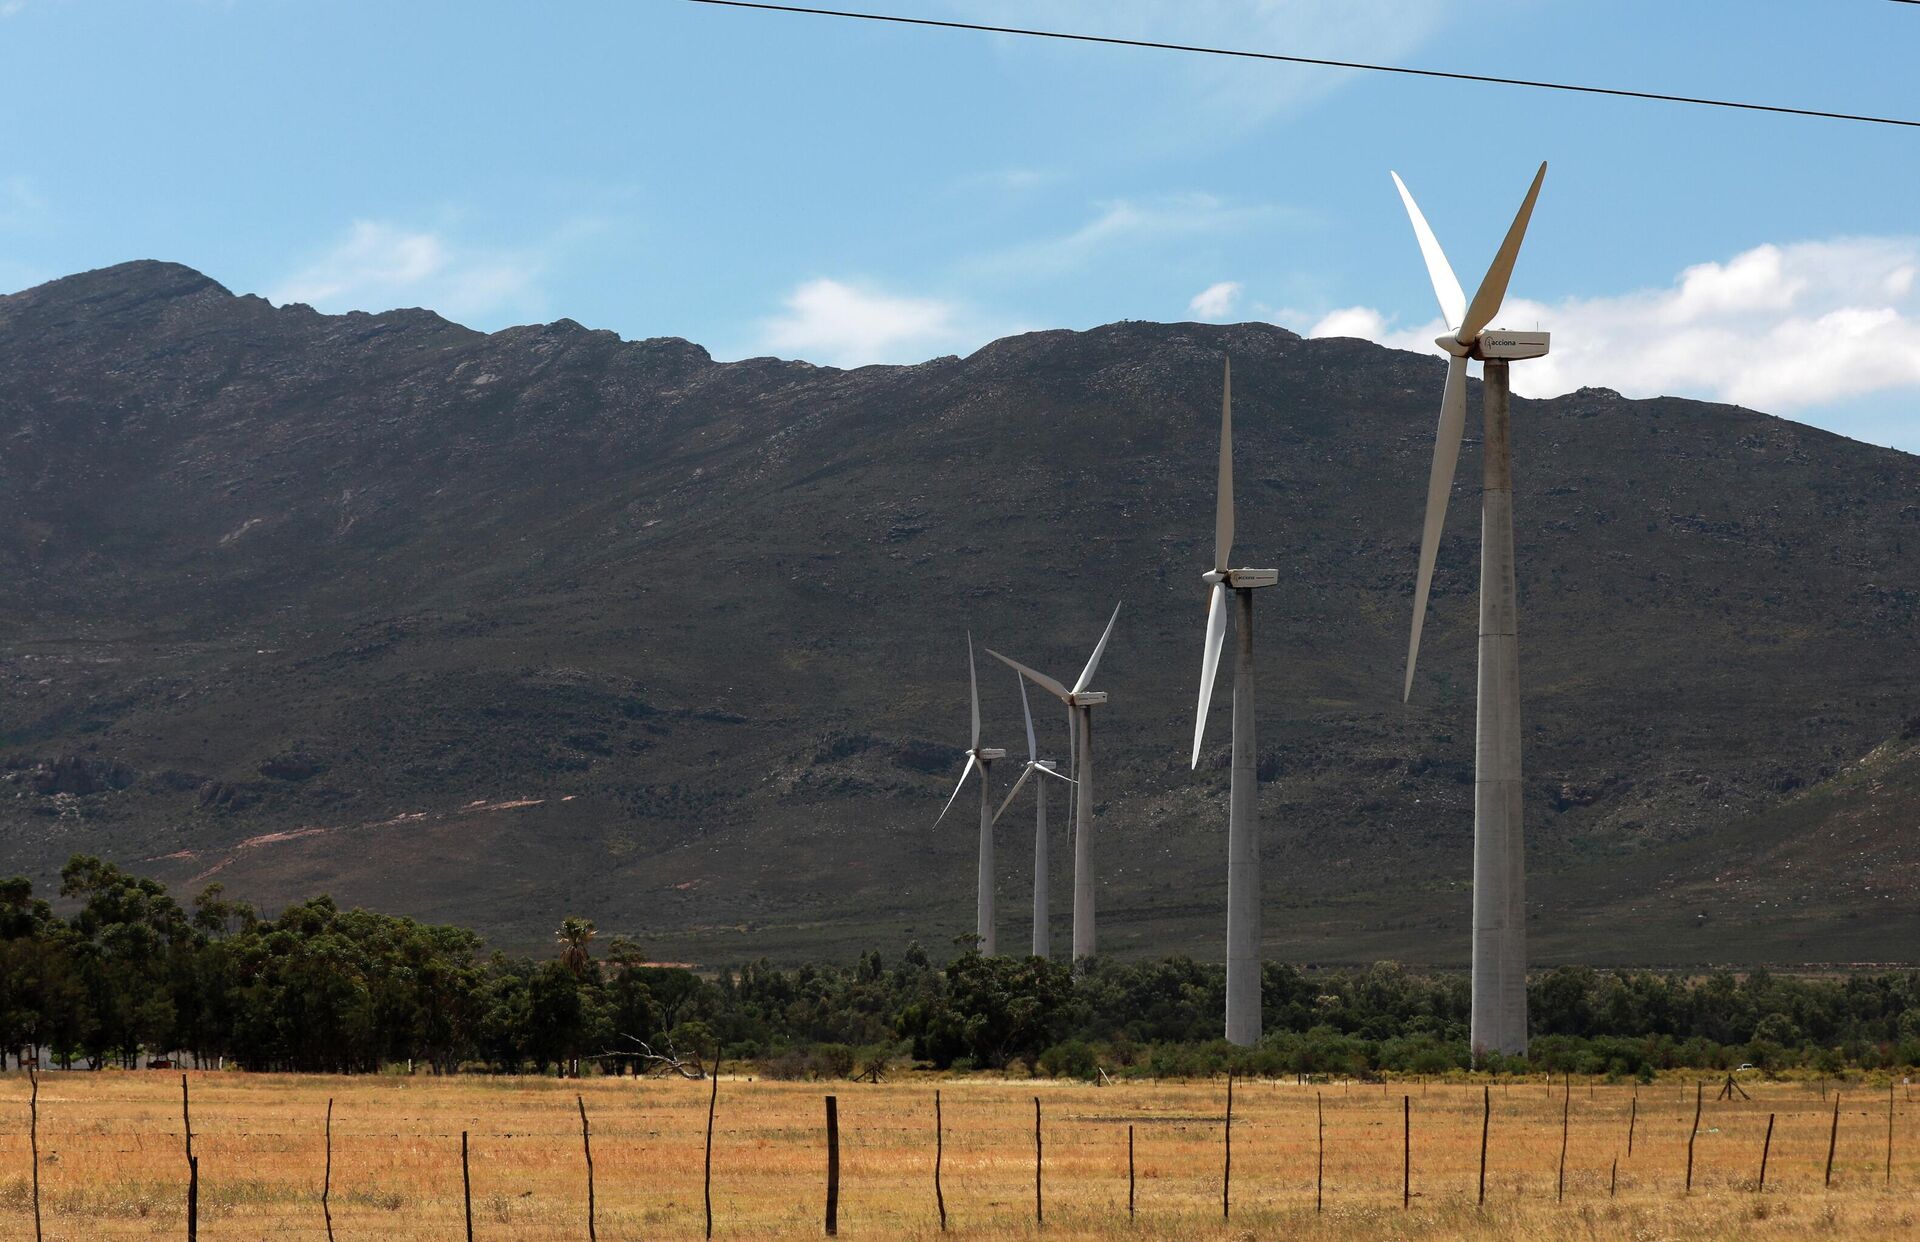 Wind turbines are seen at the Gouda Wind Farm located 115 km north east of Cape Town, South Africa, Monday, Nov. 7, 2022. The wind farm is one of the biggest in Southern Africa. - Sputnik International, 1920, 25.11.2022